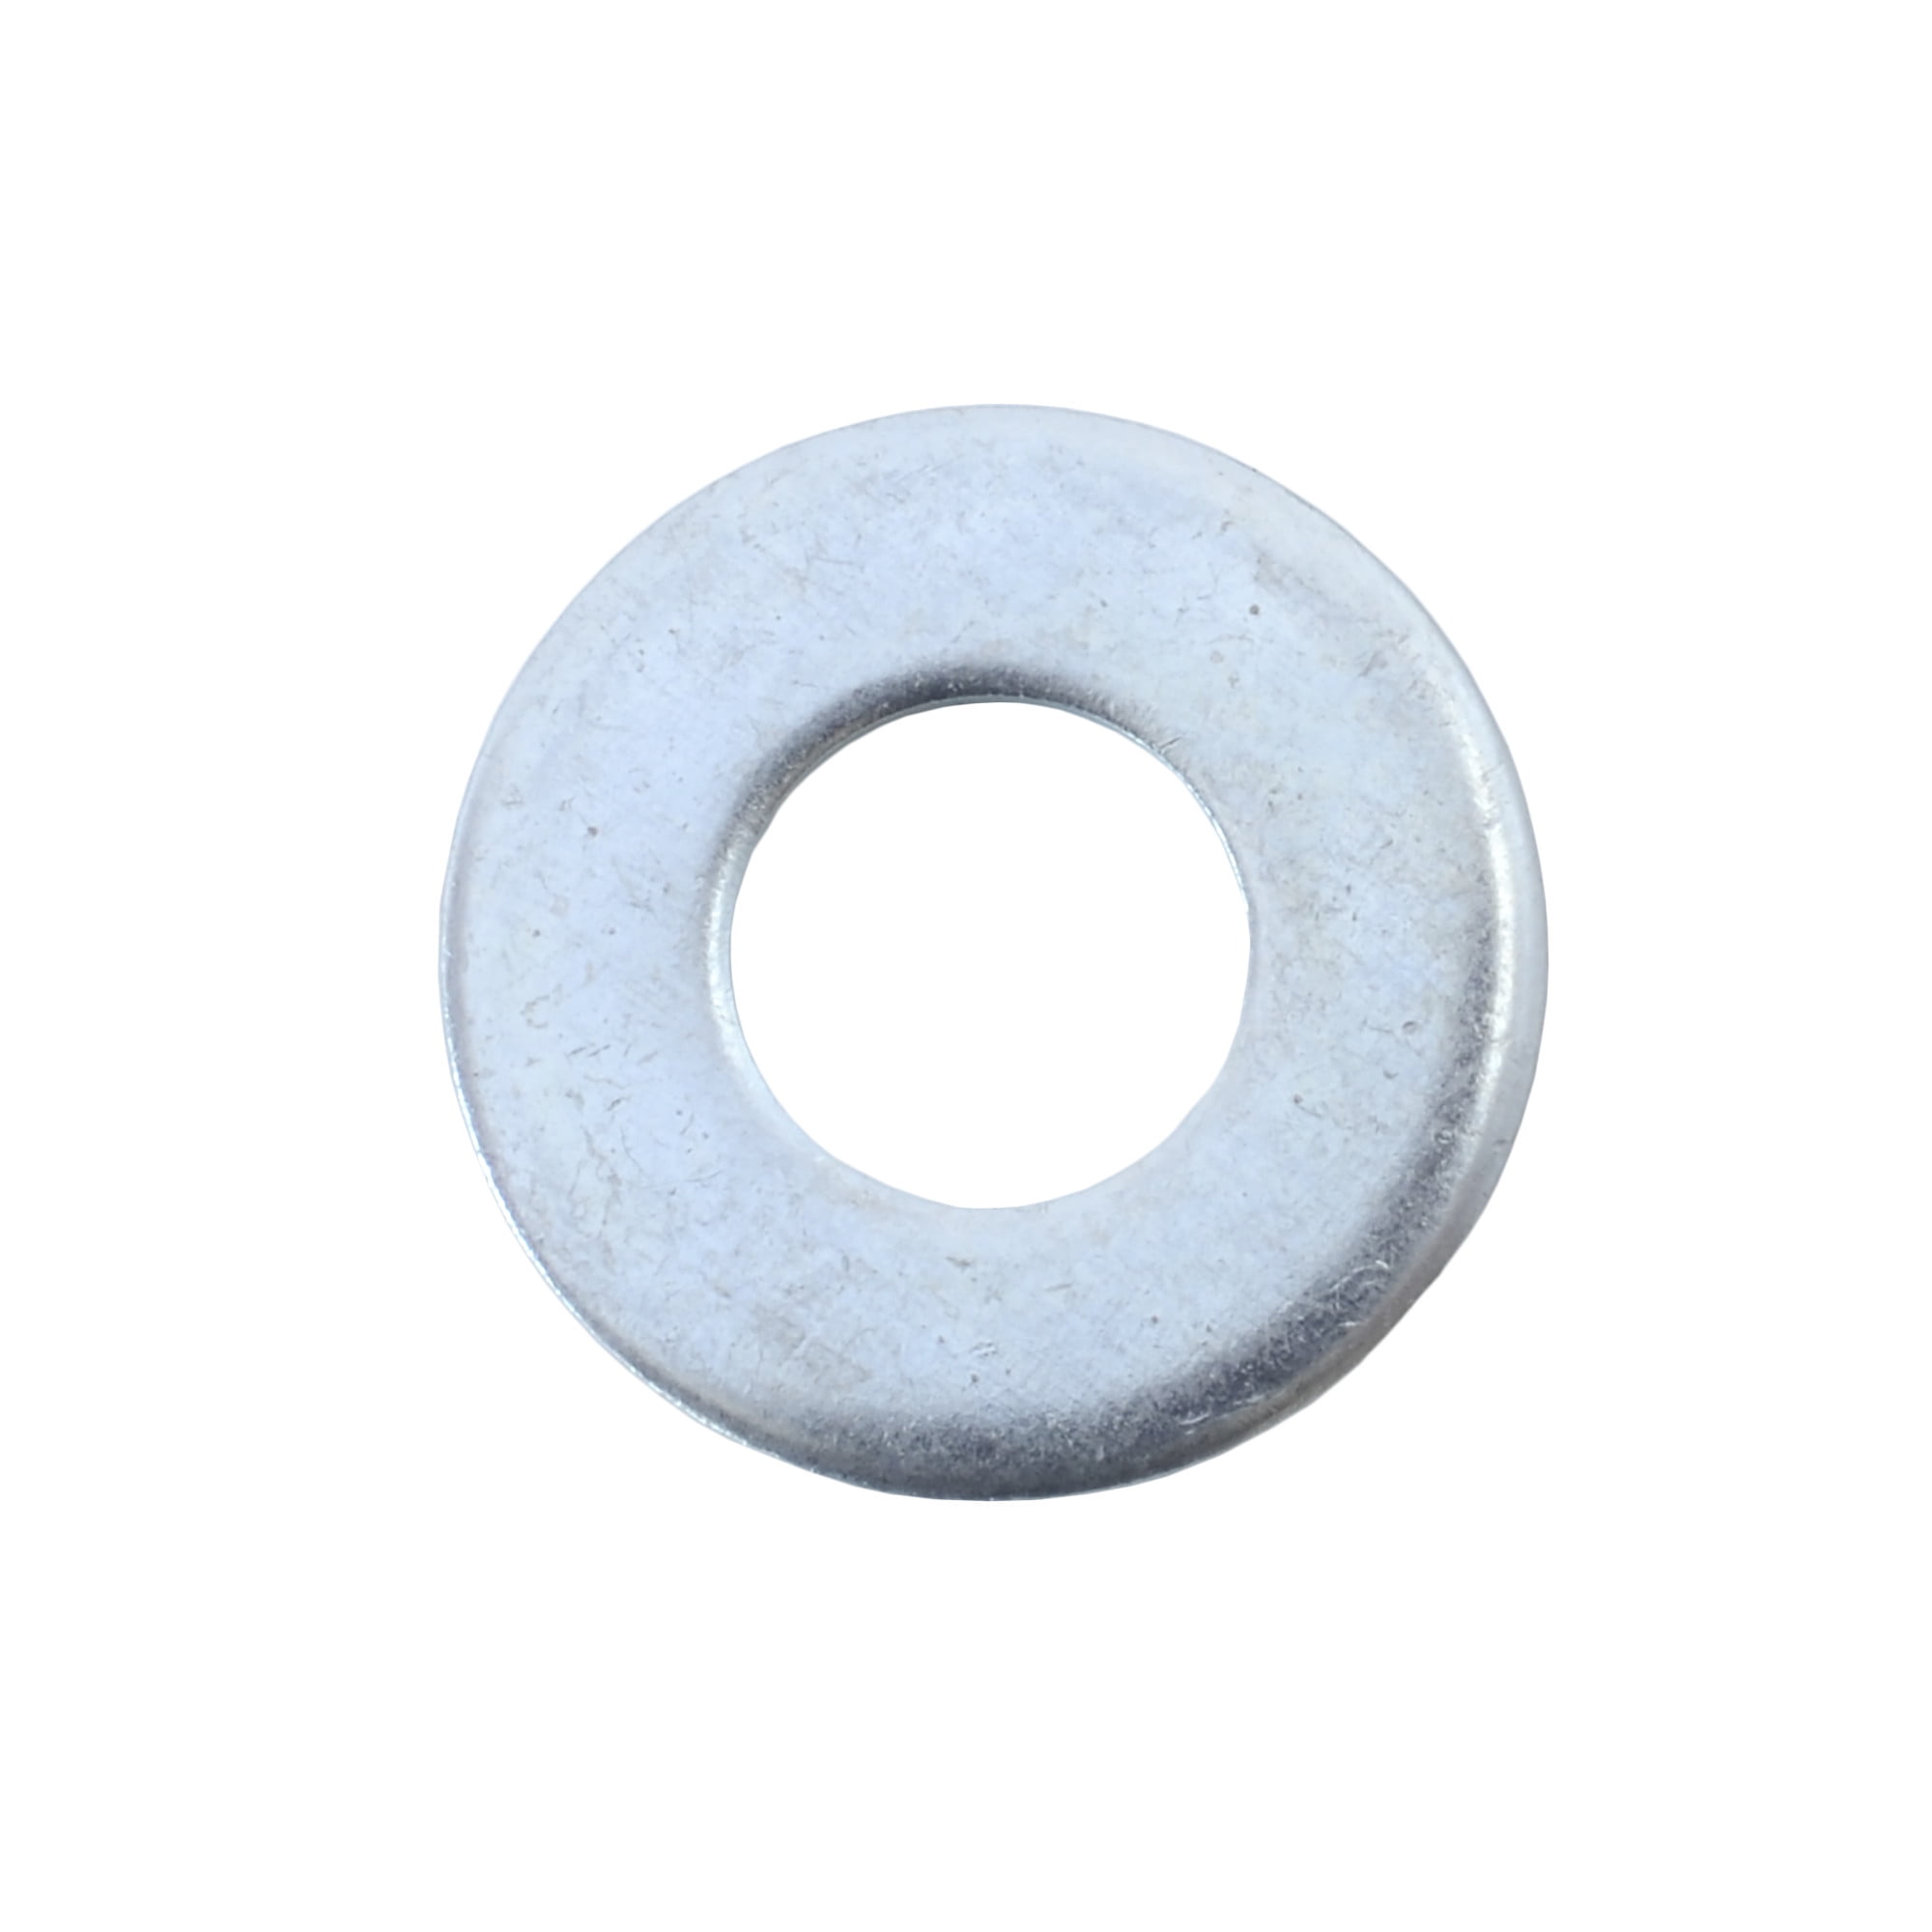 5/8 Steel Zinc Plated Finish Washer Cap Nuts,25 pk.